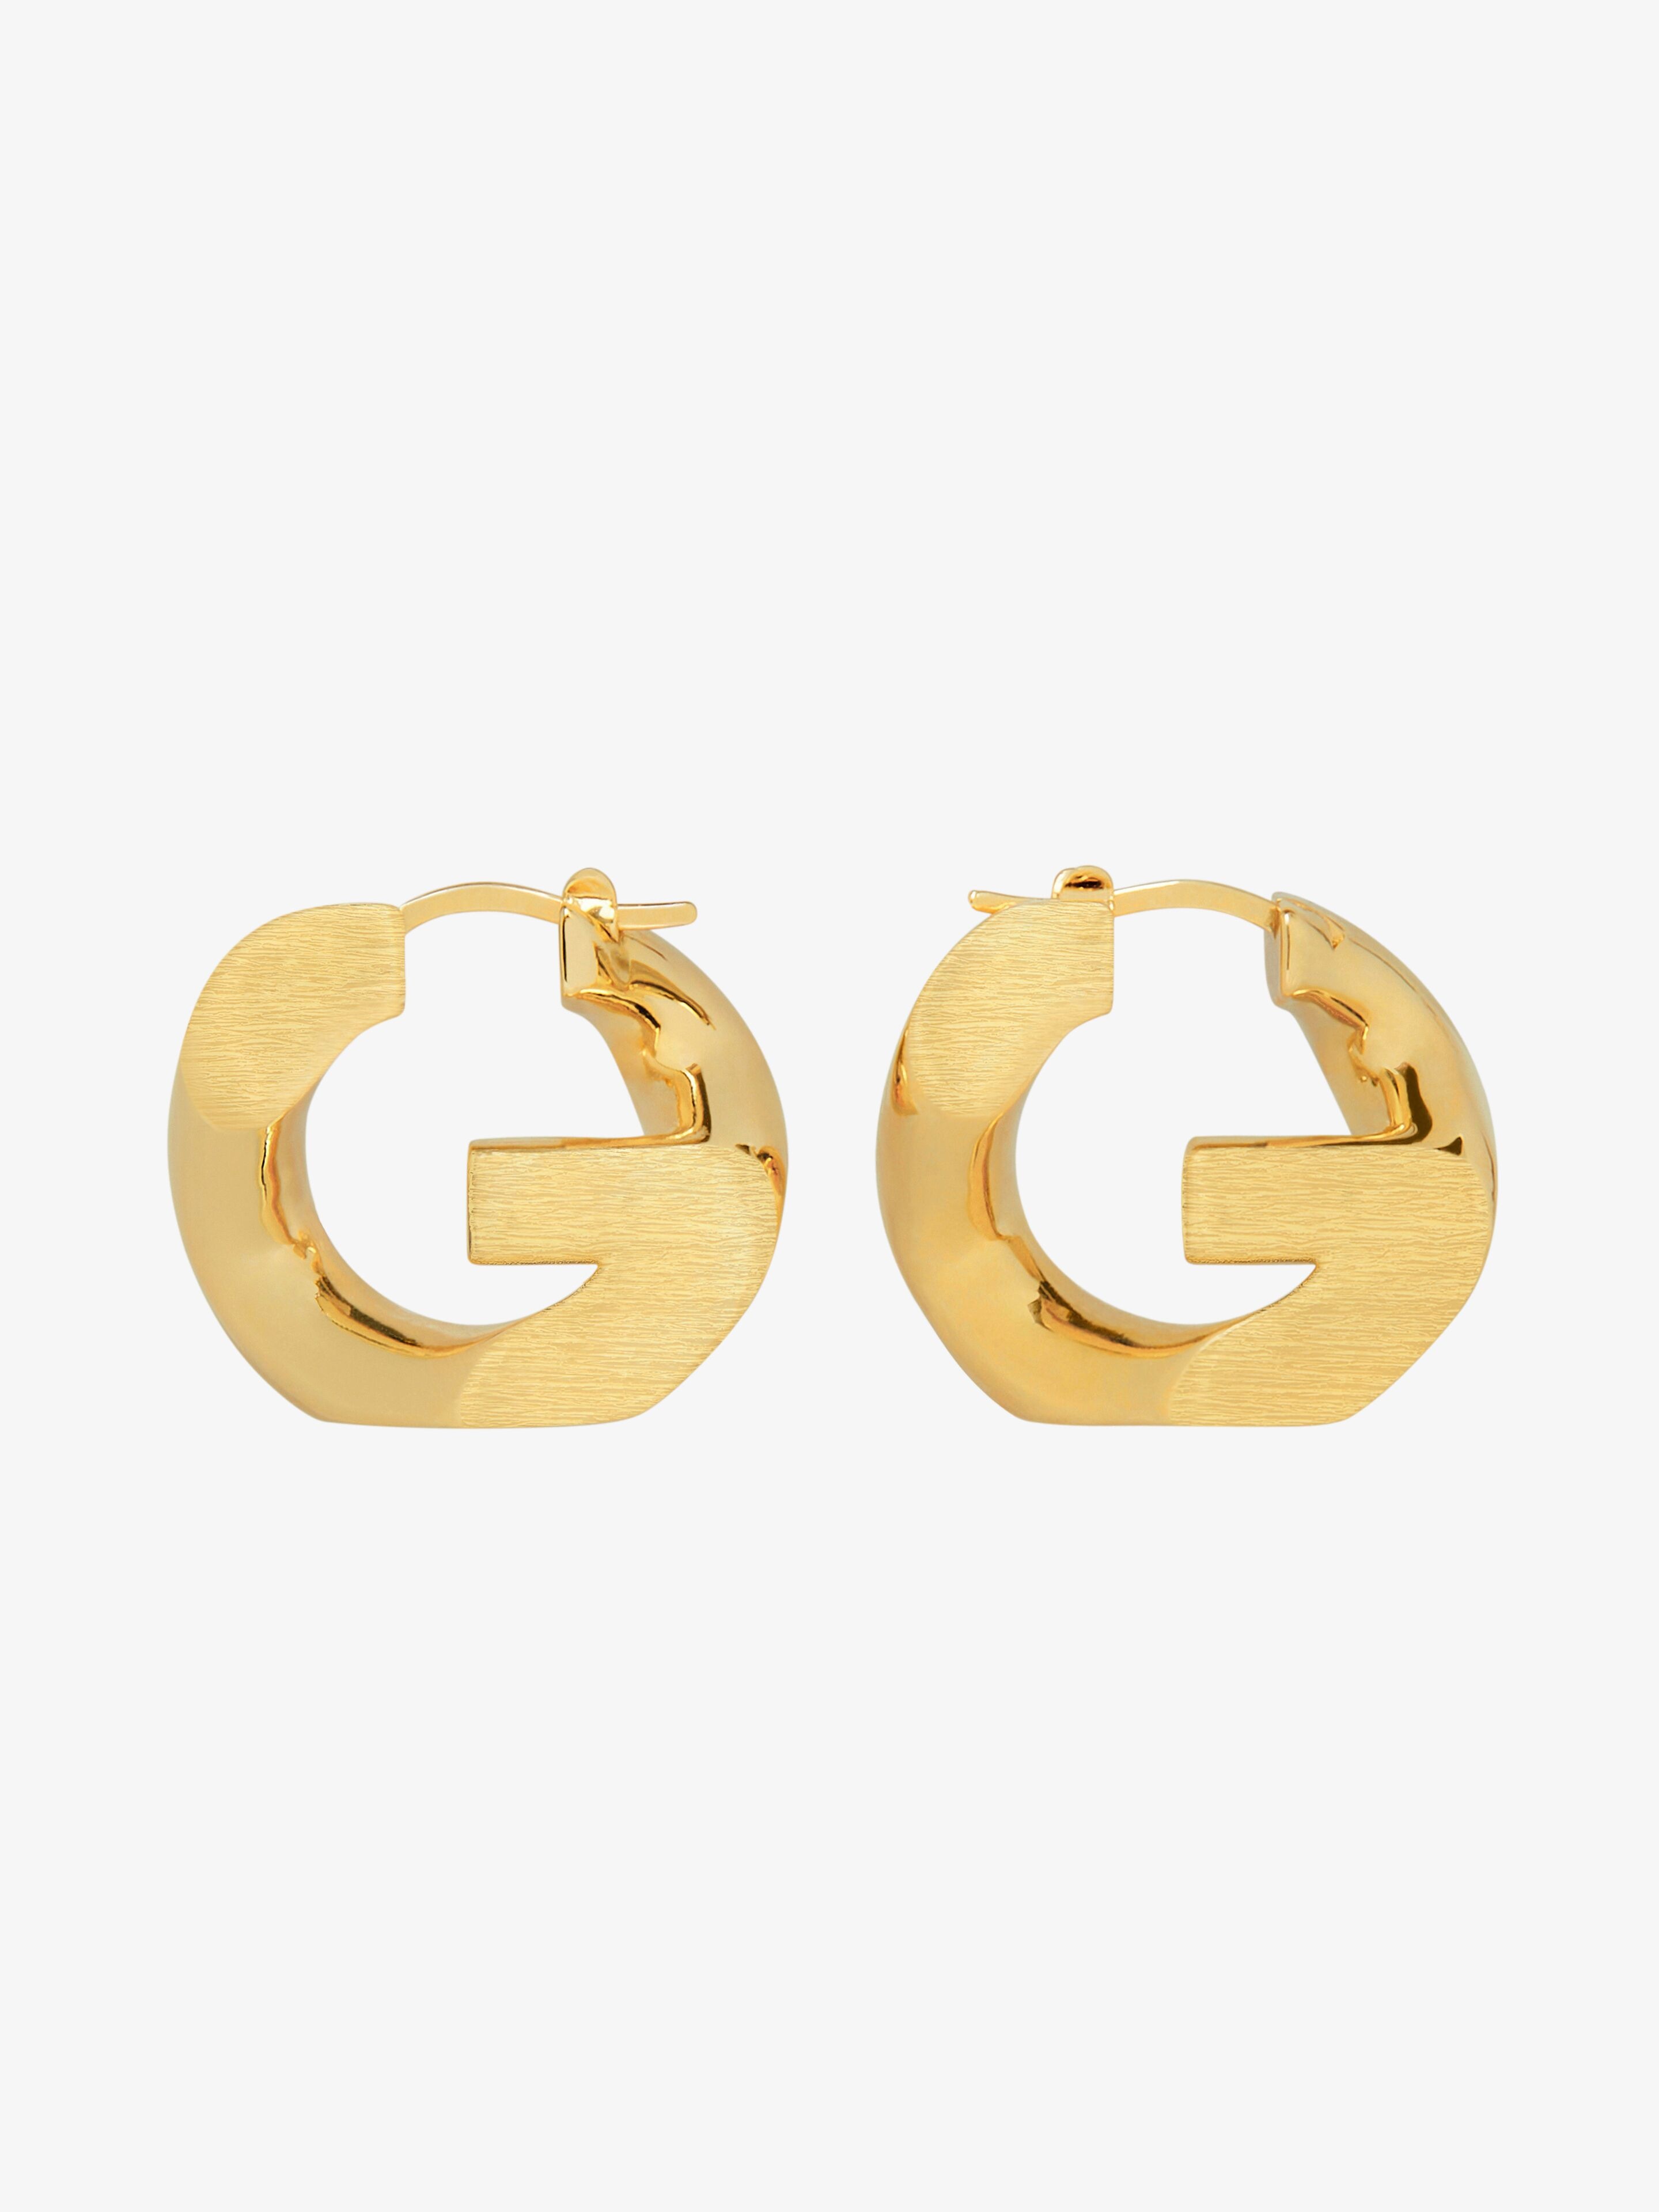 GIVENCHY G CHAIN EARRINGS IN METAL